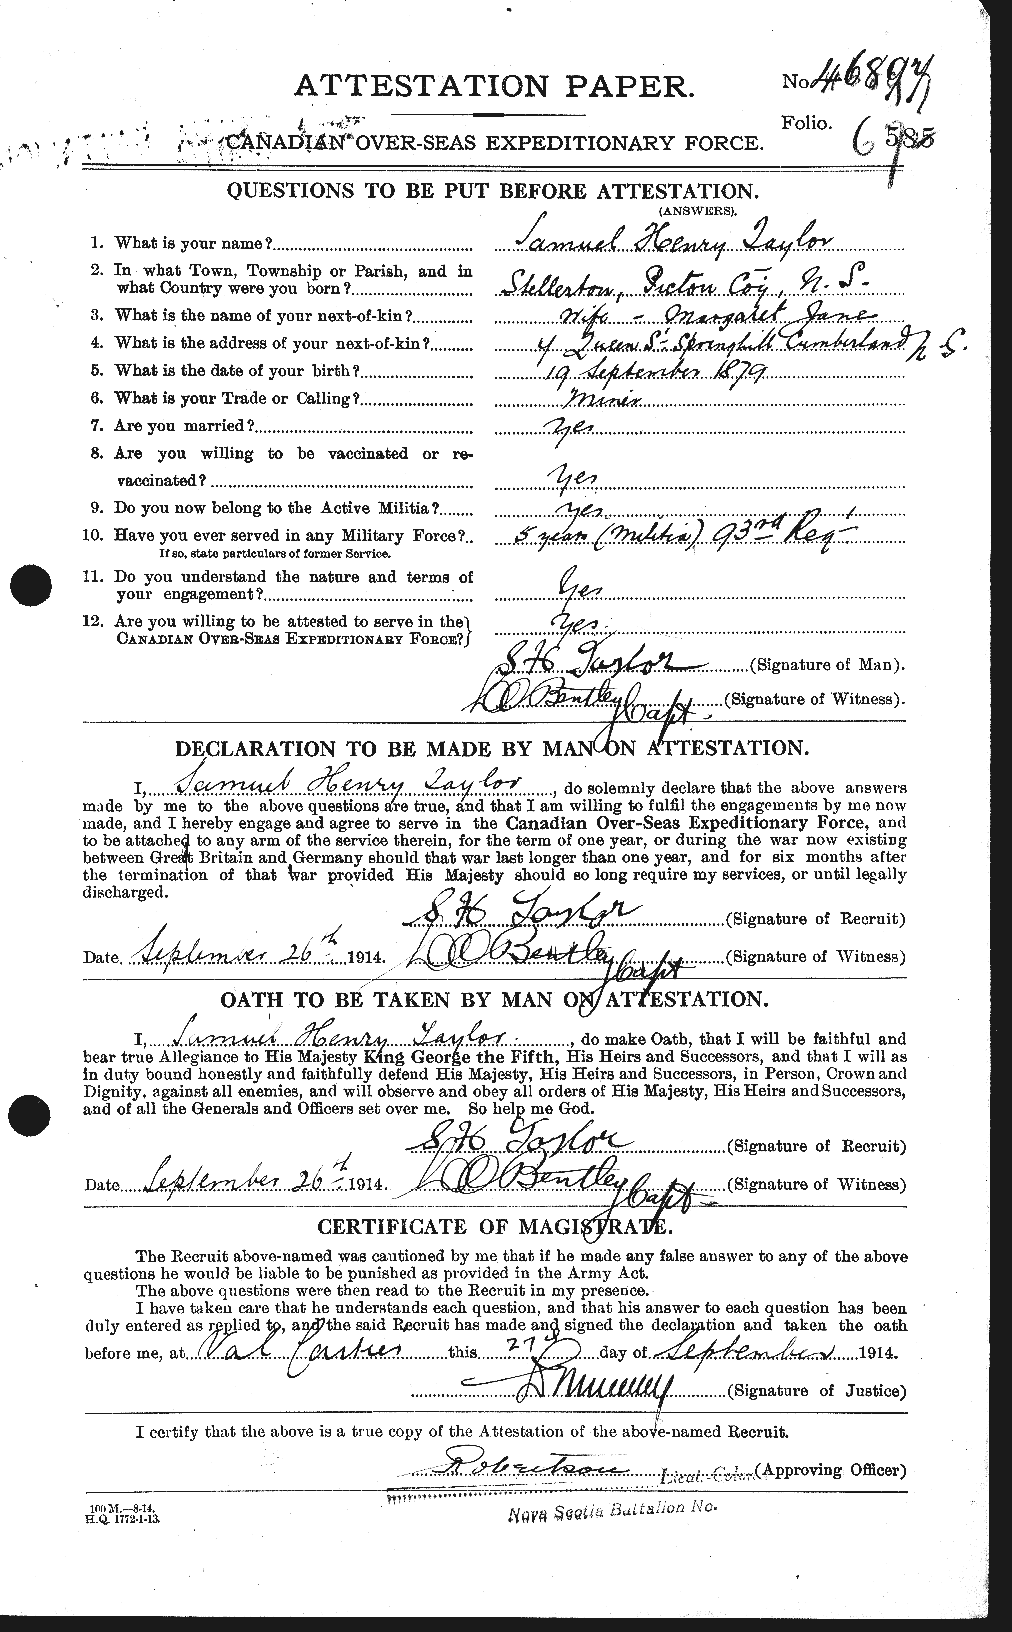 Personnel Records of the First World War - CEF 627878a